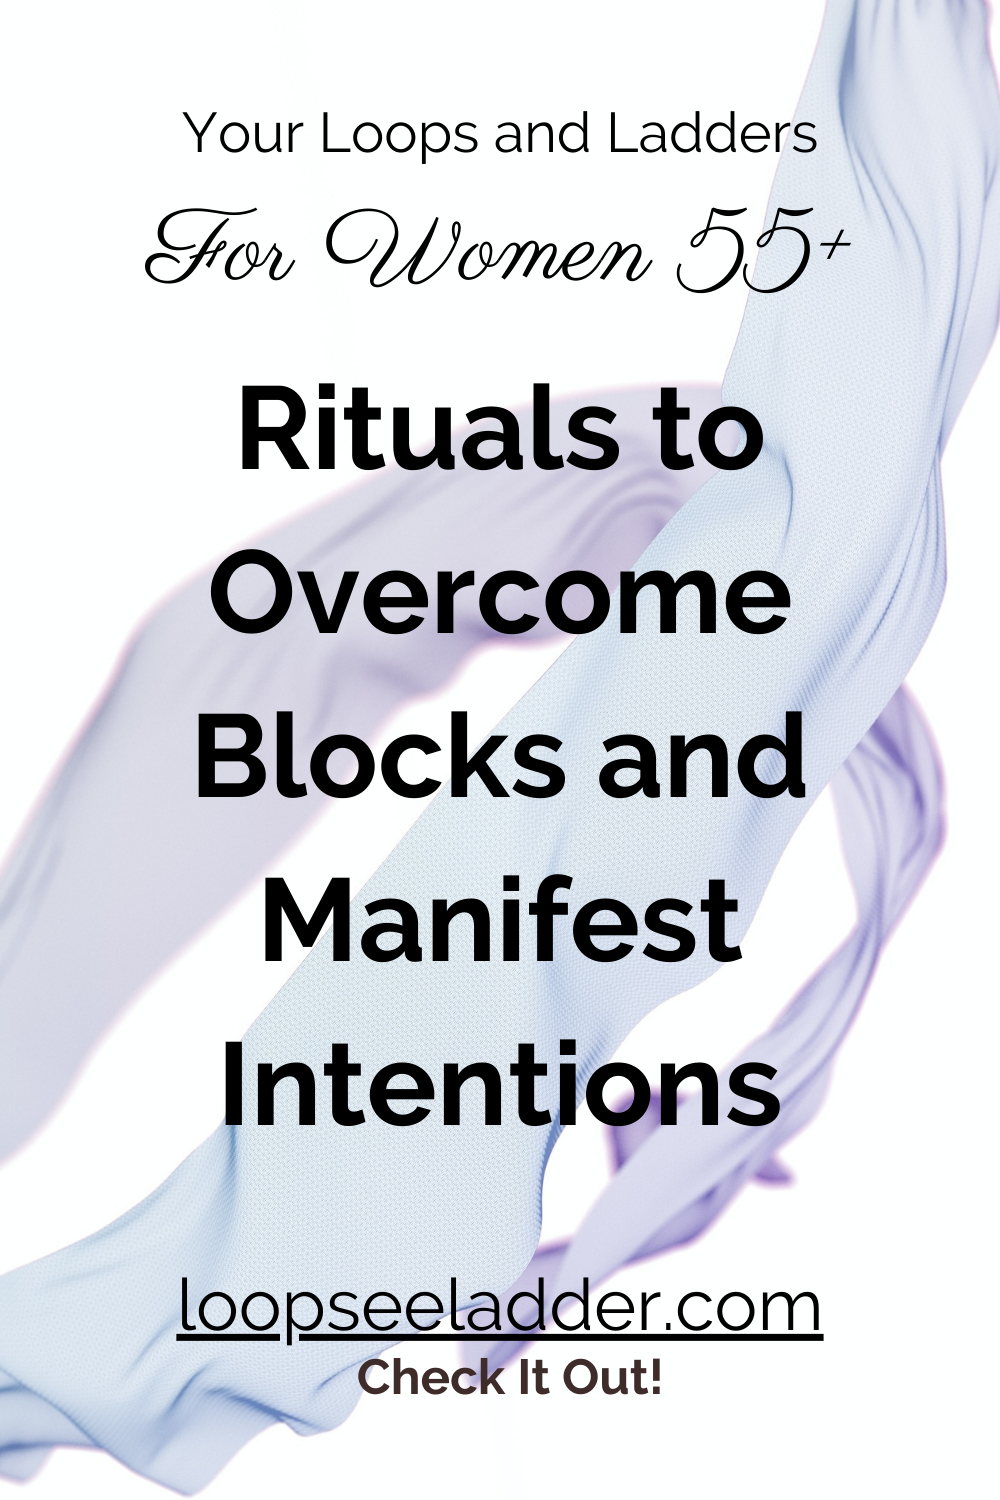 The Ritual Revolution: Empowering Women 55+ to Overcome Blocks and Manifest Their Intentions